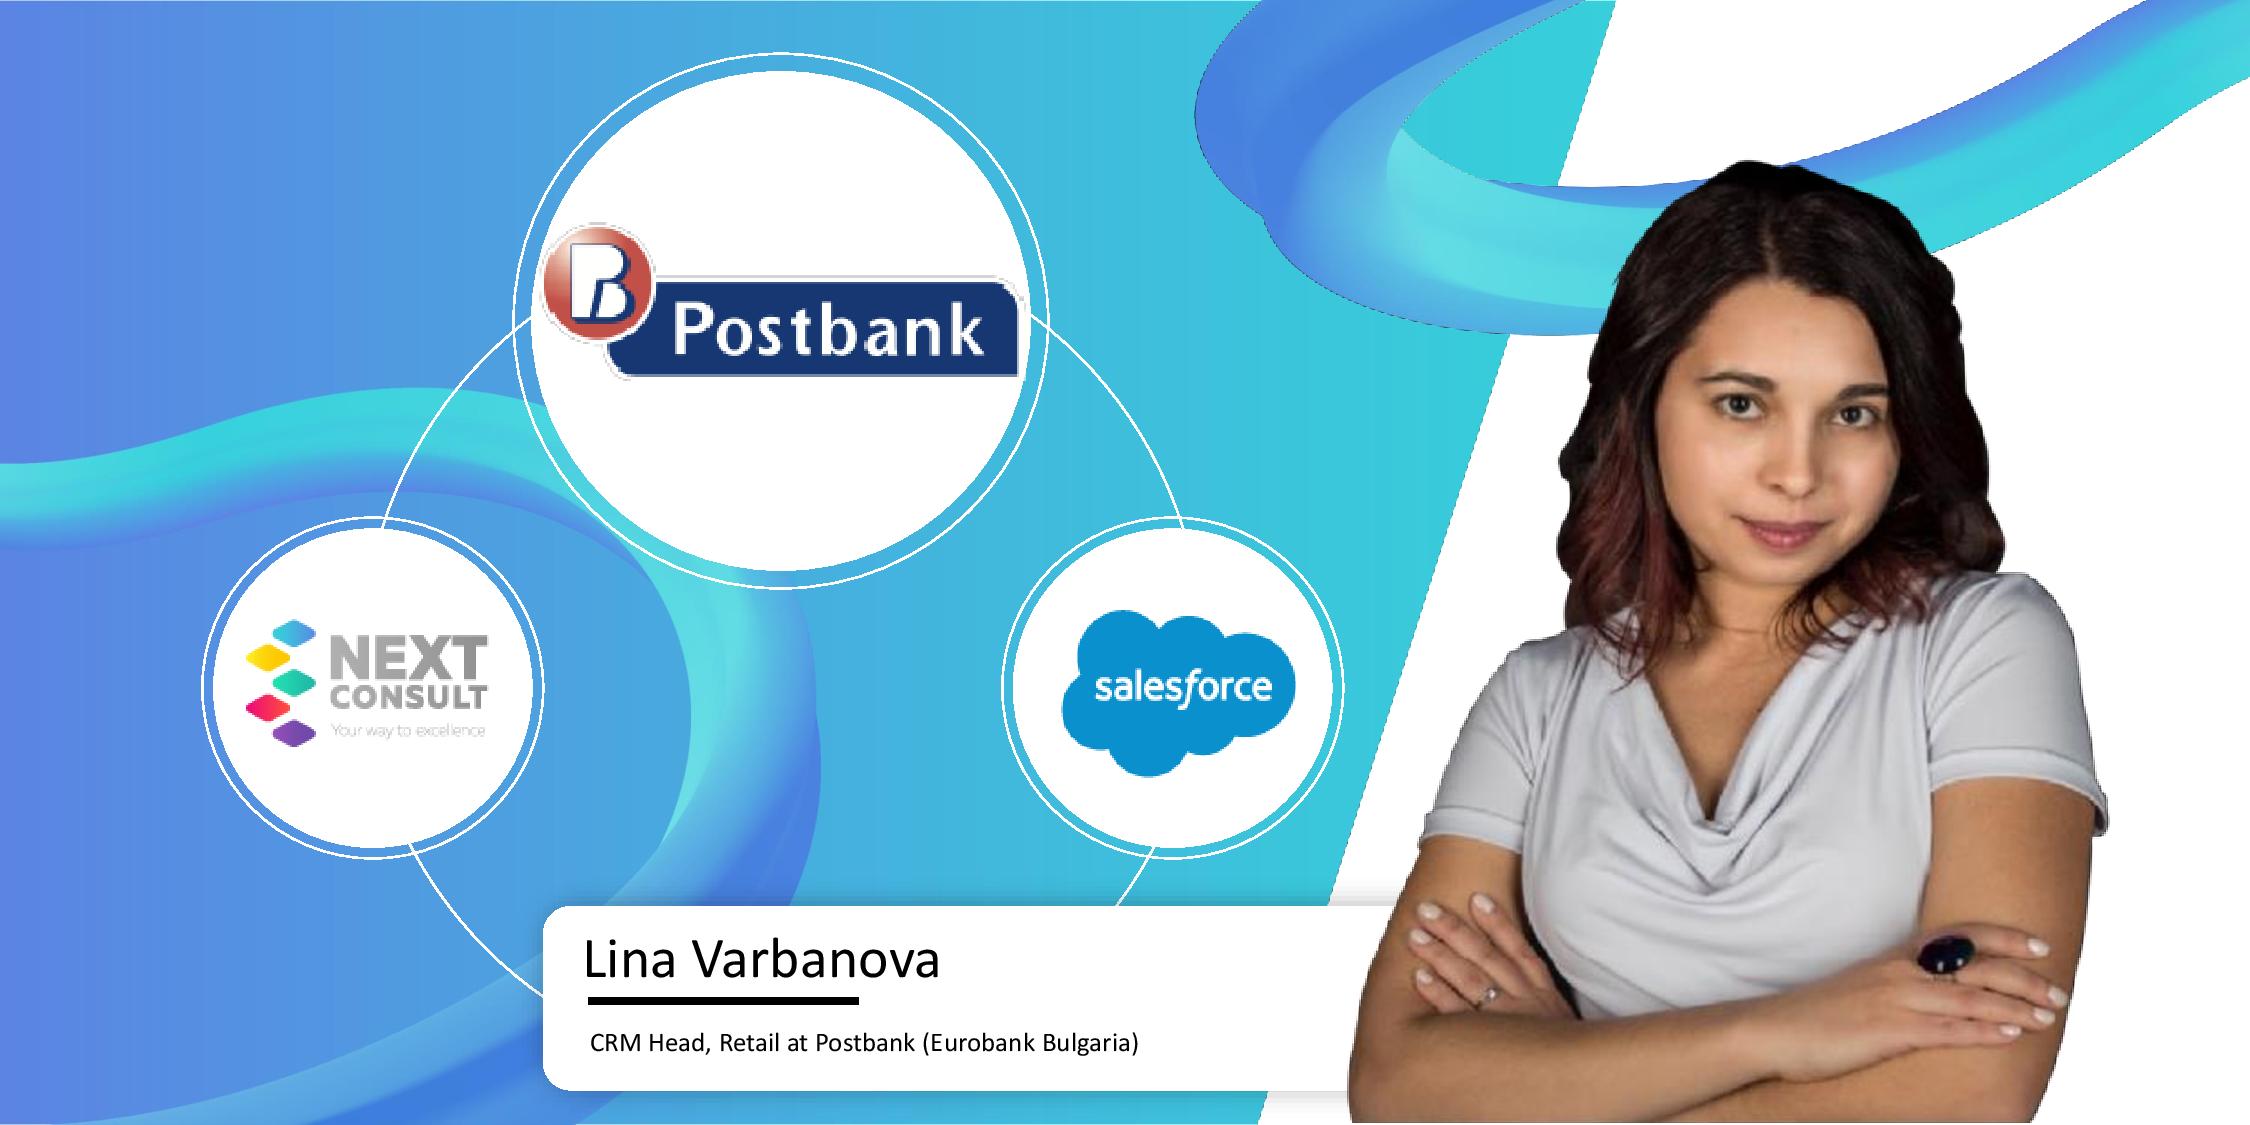 POSTBANK MAKES MAJOR CHANGES IN THE WAY IT DOES CUSTOMER COMMUNICATION MANAGEMENT